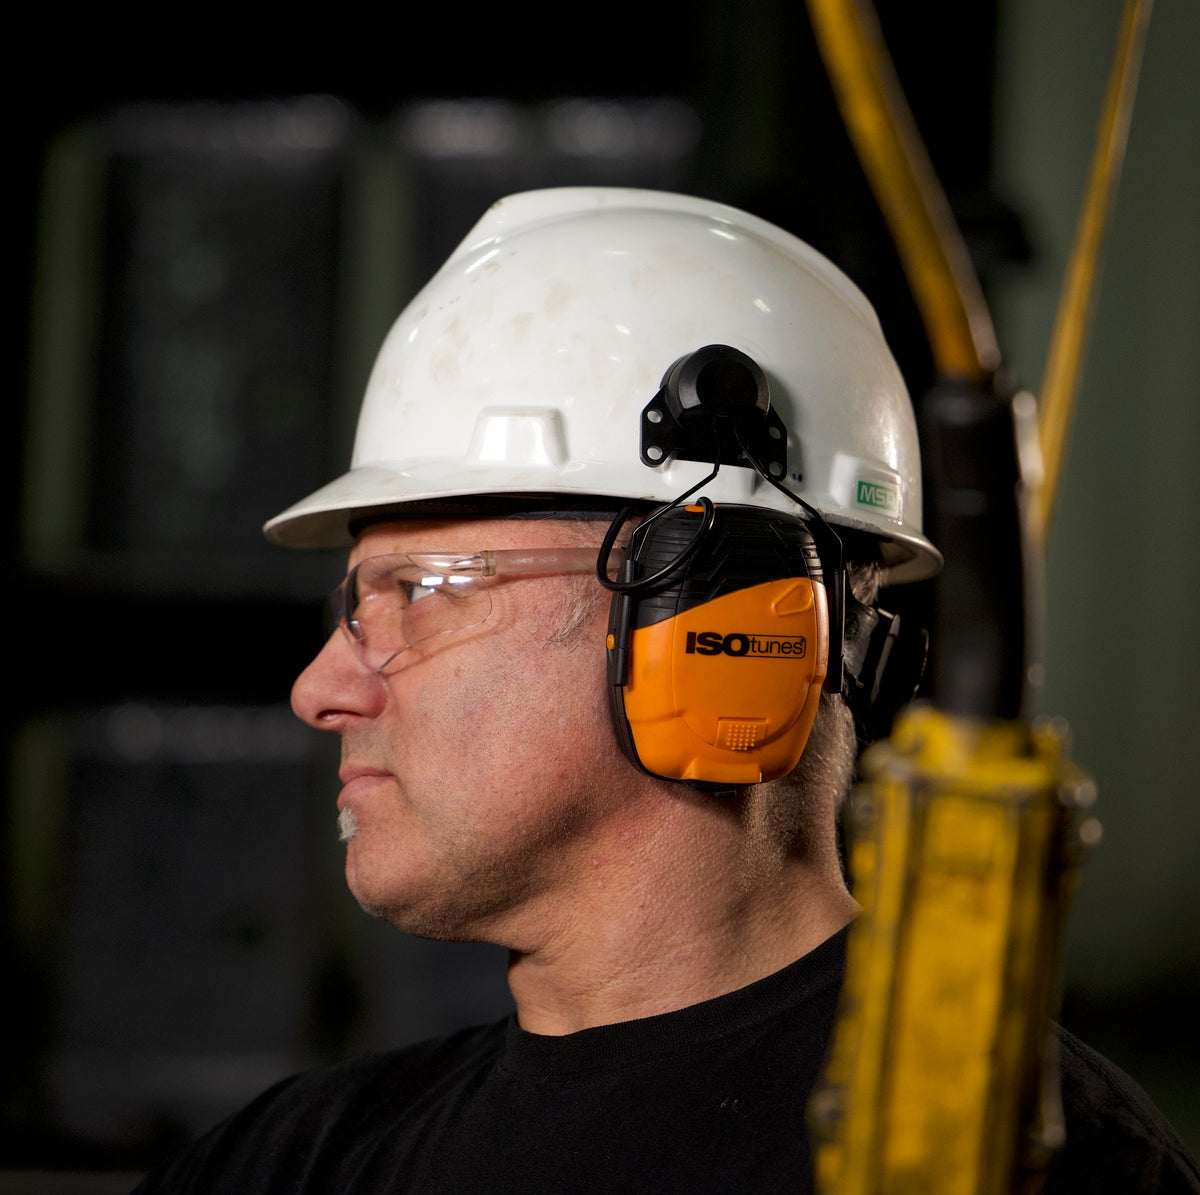 ISOtunes In the Wild LINK 2 Helmet Mount Hearing Protection with Bluetooth for the Jobsite